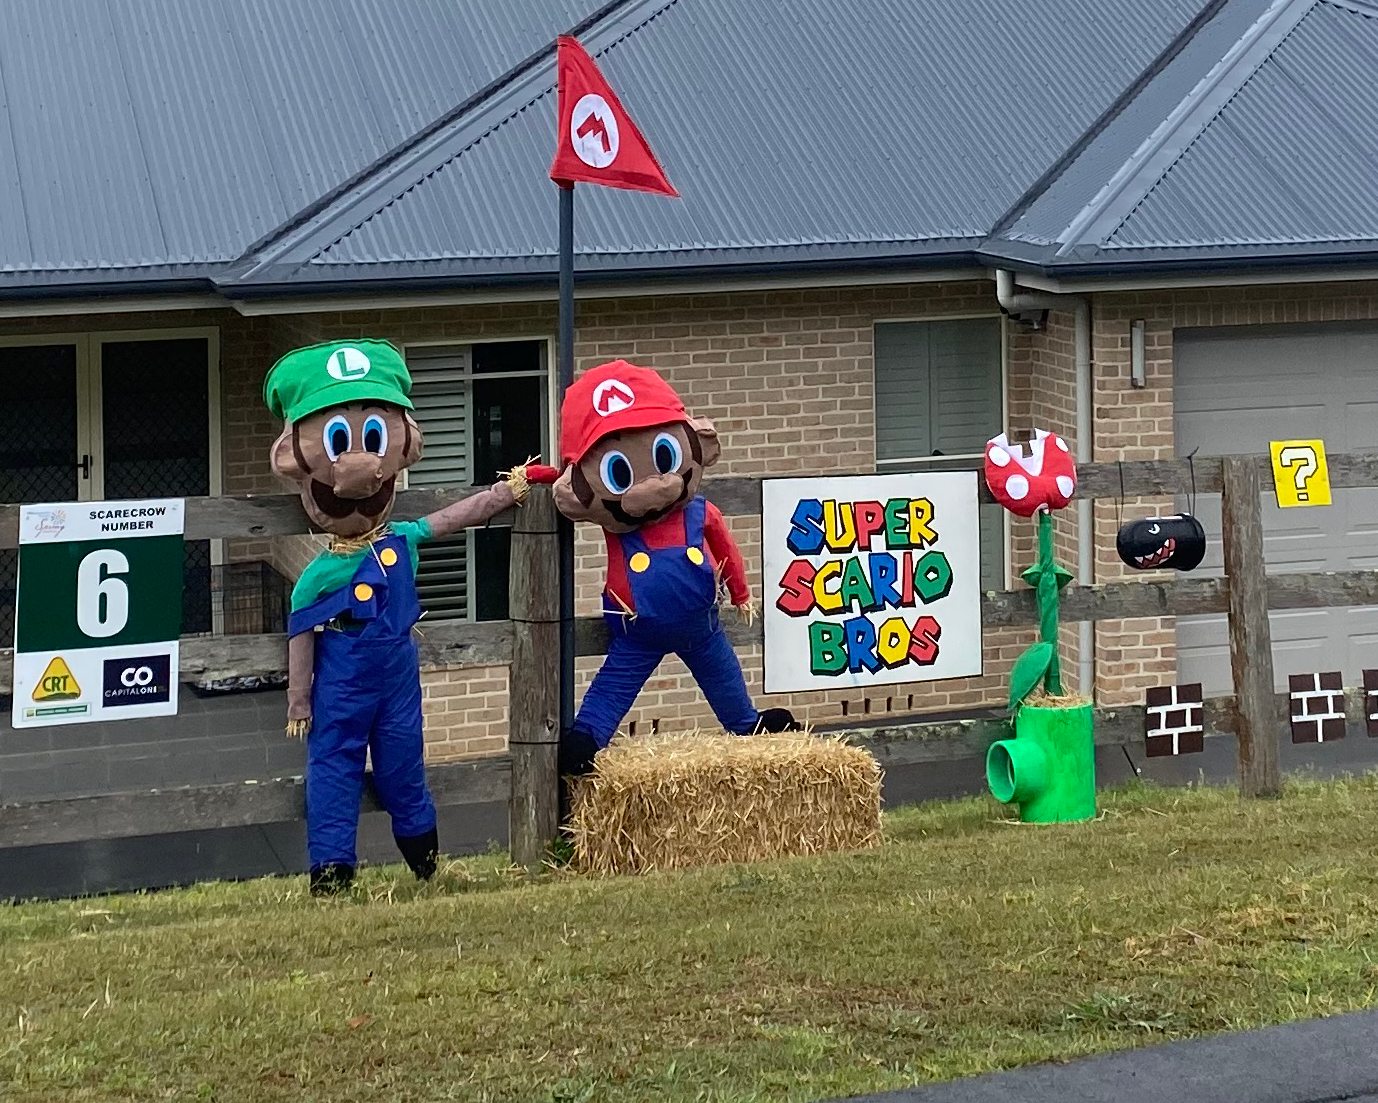 Yarramalong Valley Scarecrow Competition